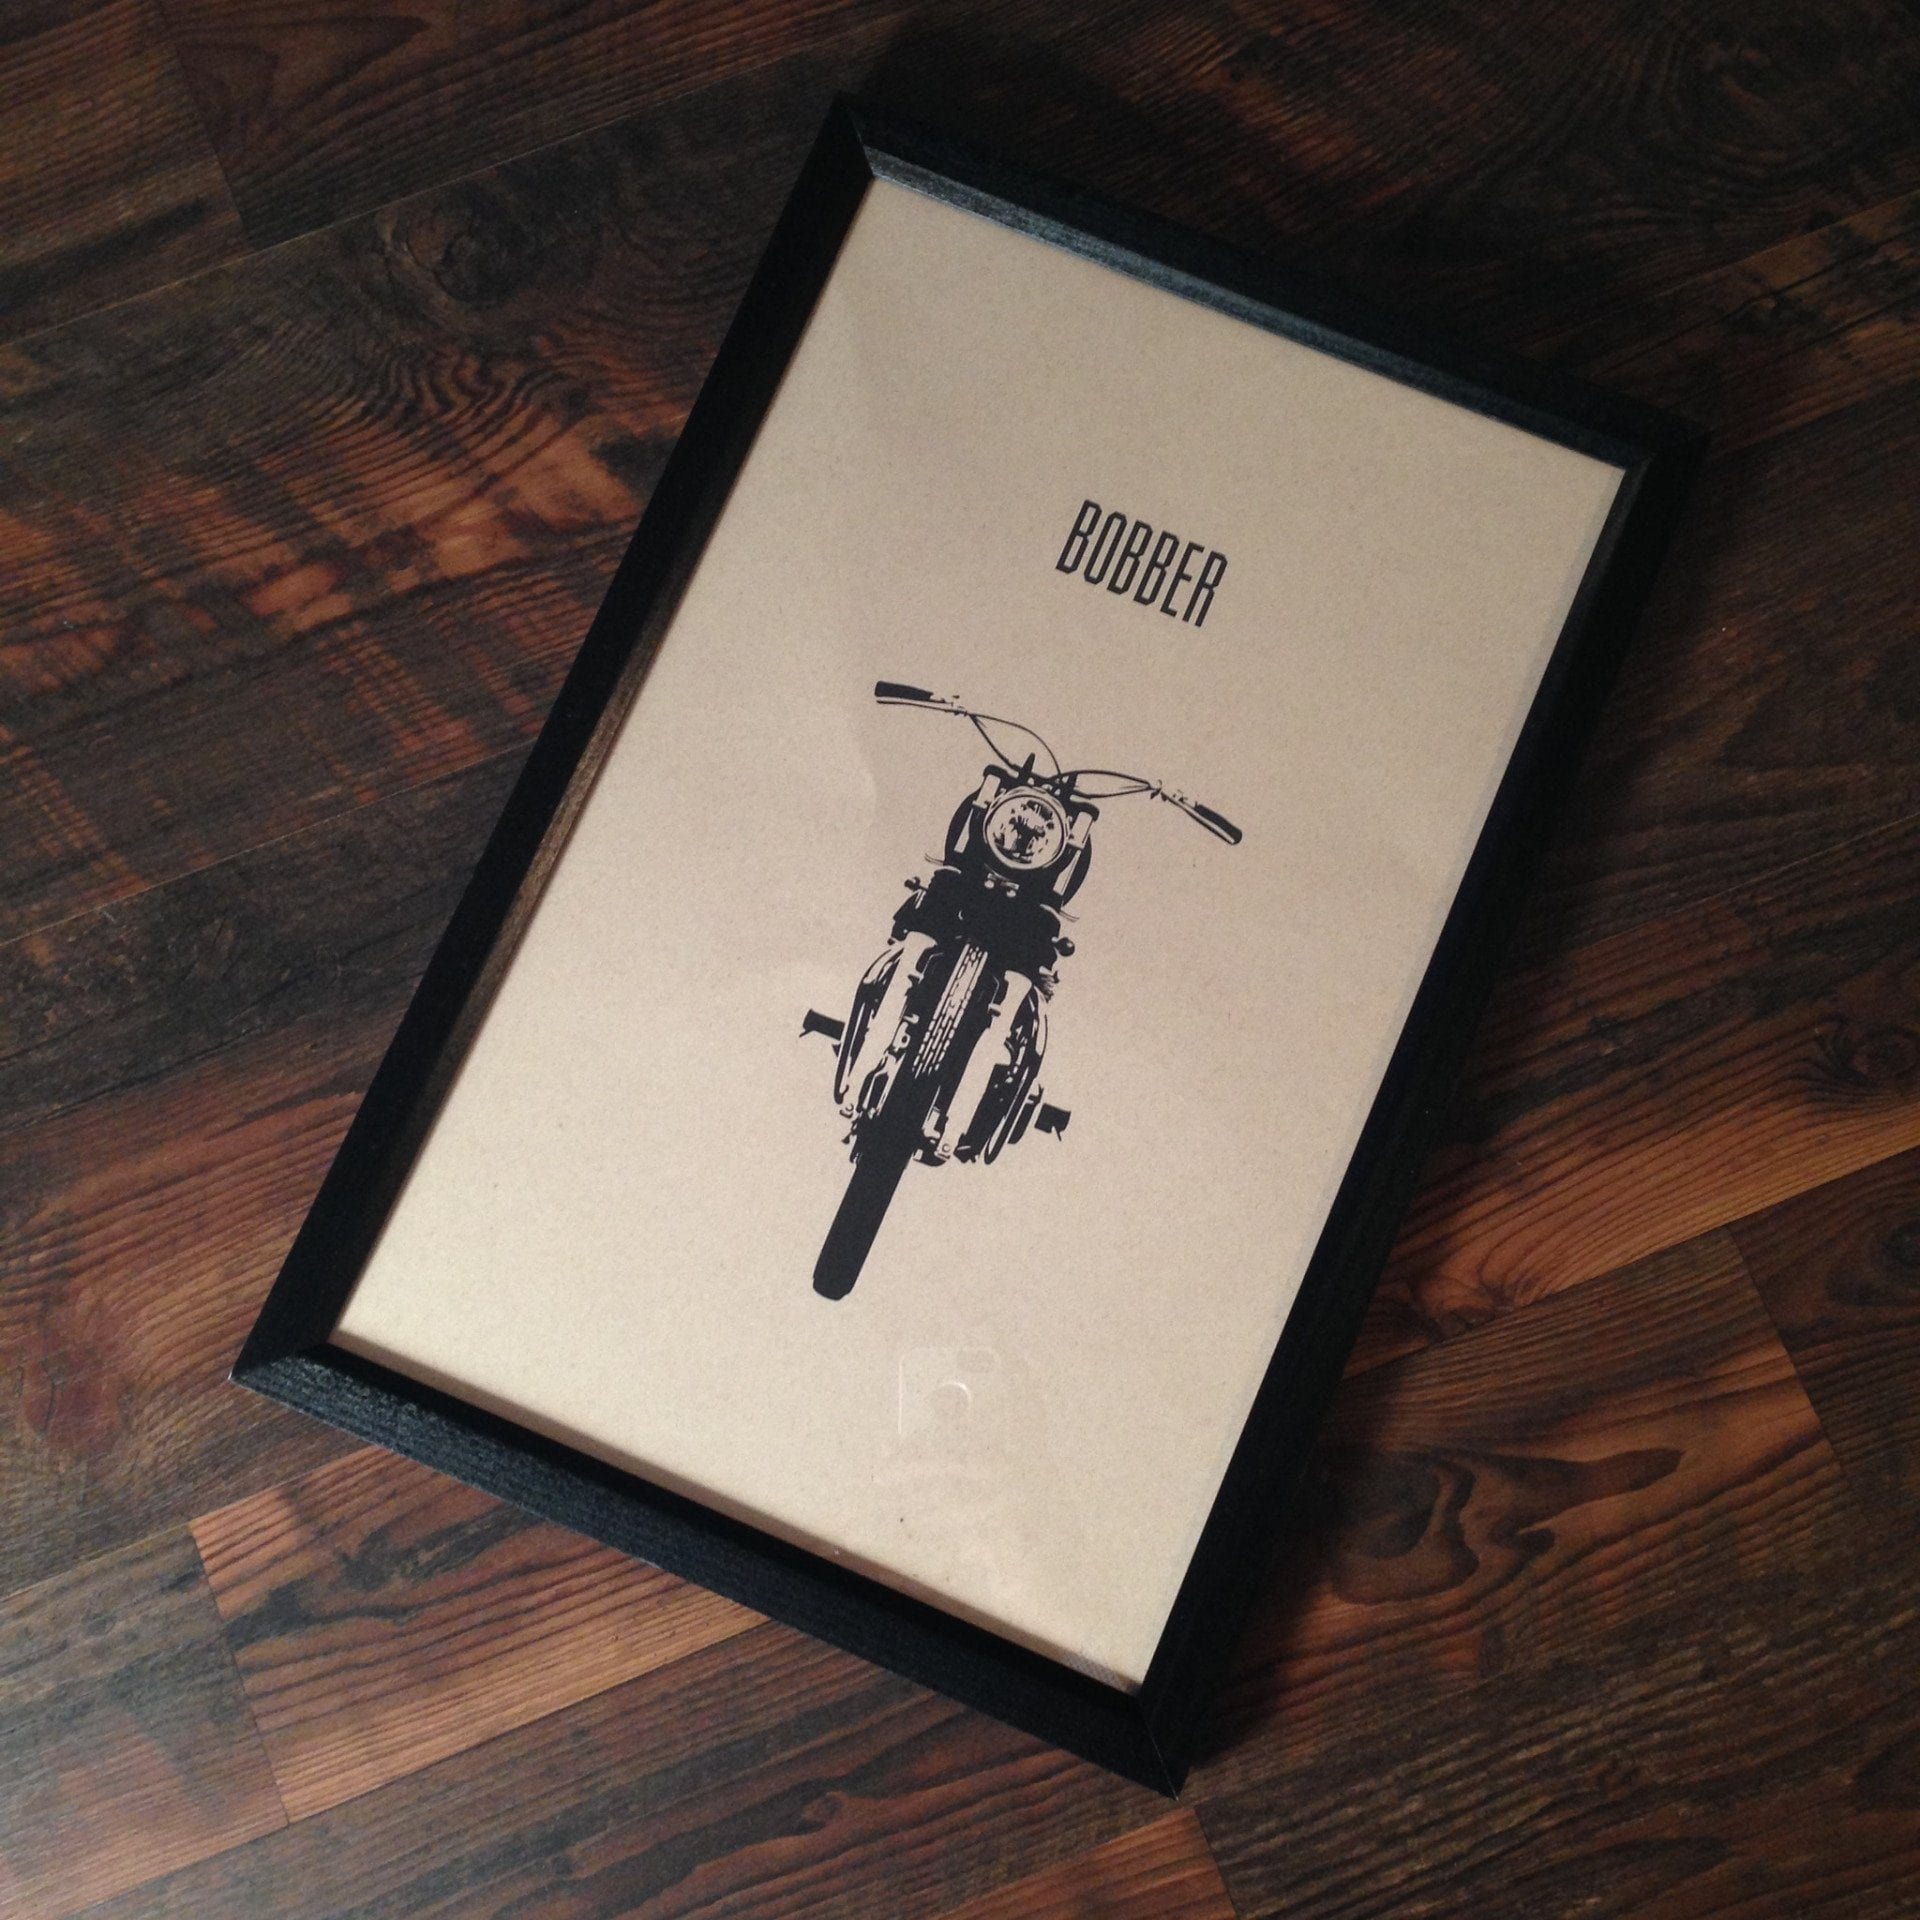 Limited Edition "Bobber" Motorcycle Framed Poster by Inked Iron - Cognito Moto